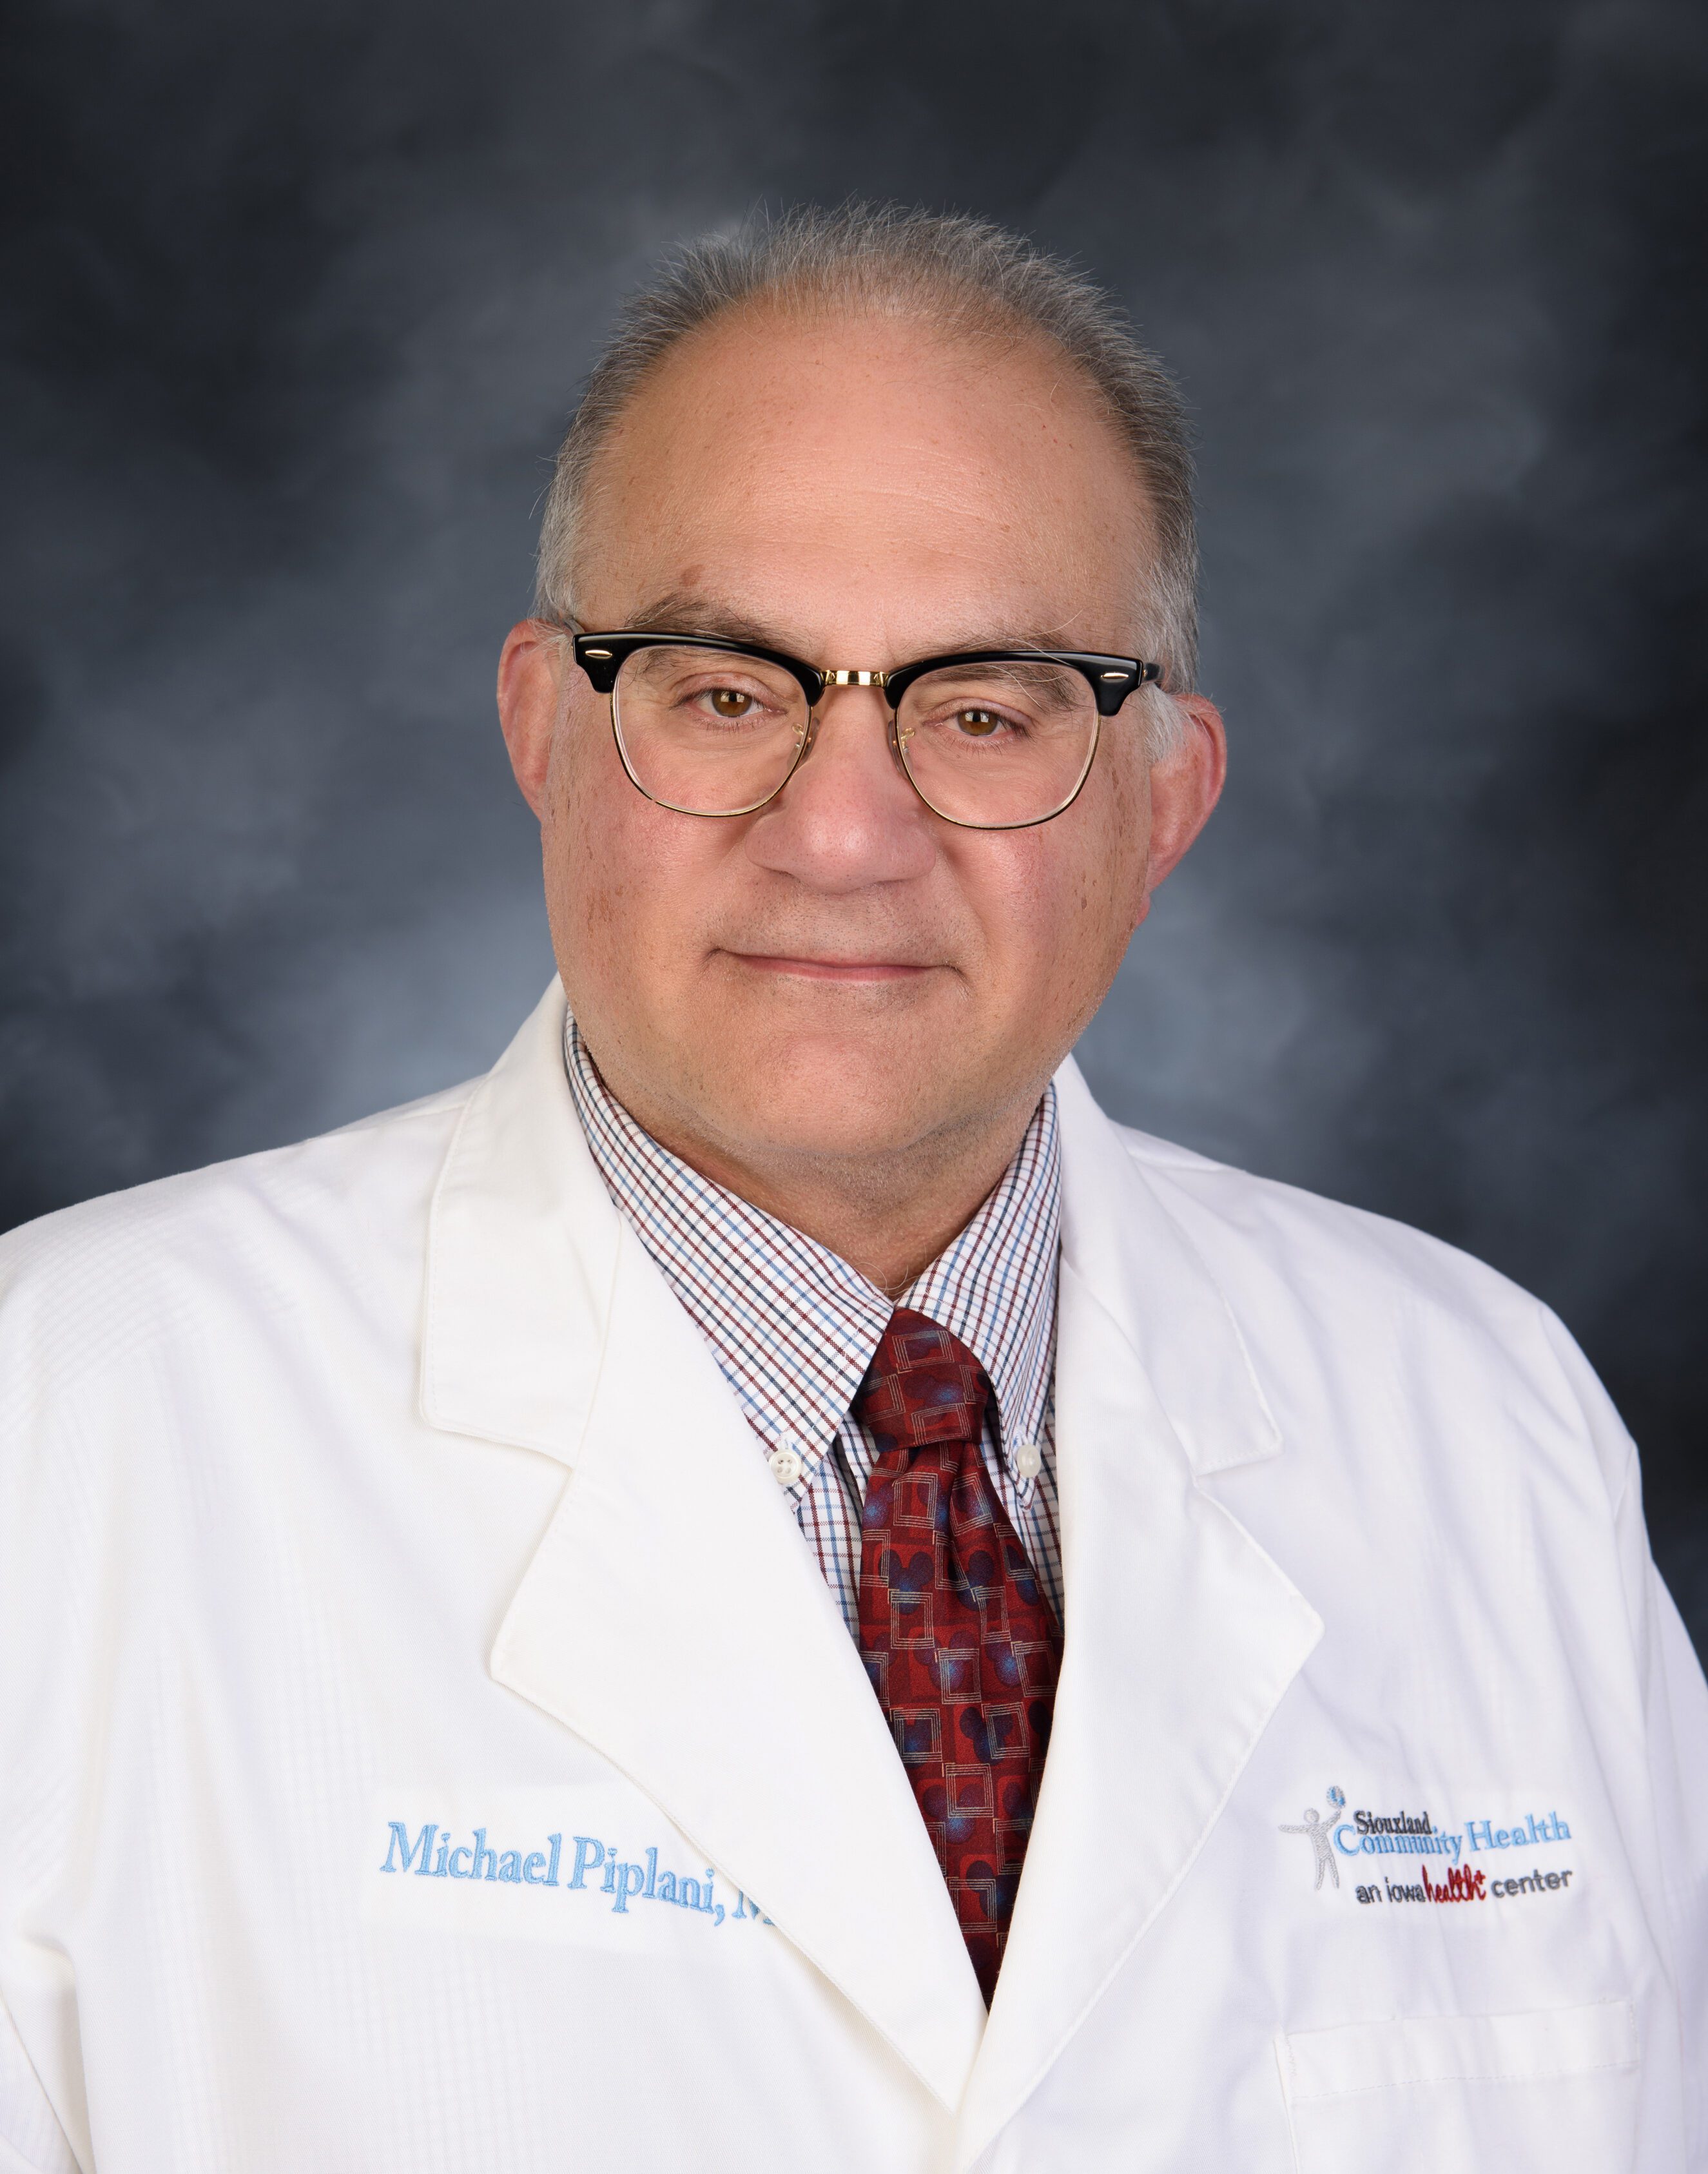 Michael Piplani, MD, Chief Medical Officer